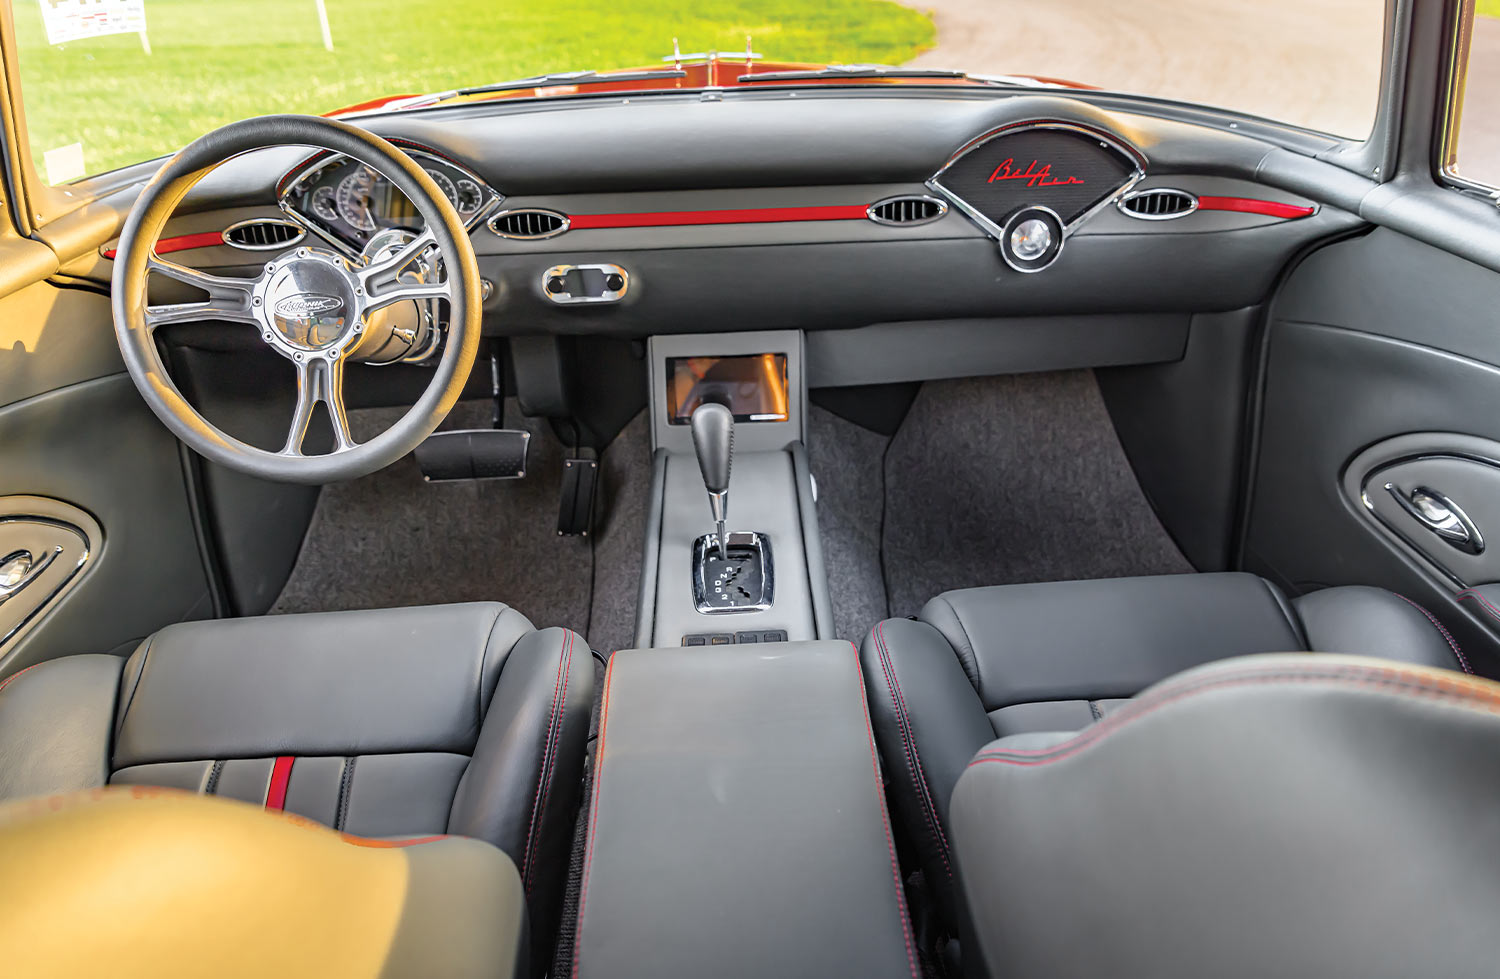 interior view from the rear of the LS V-10